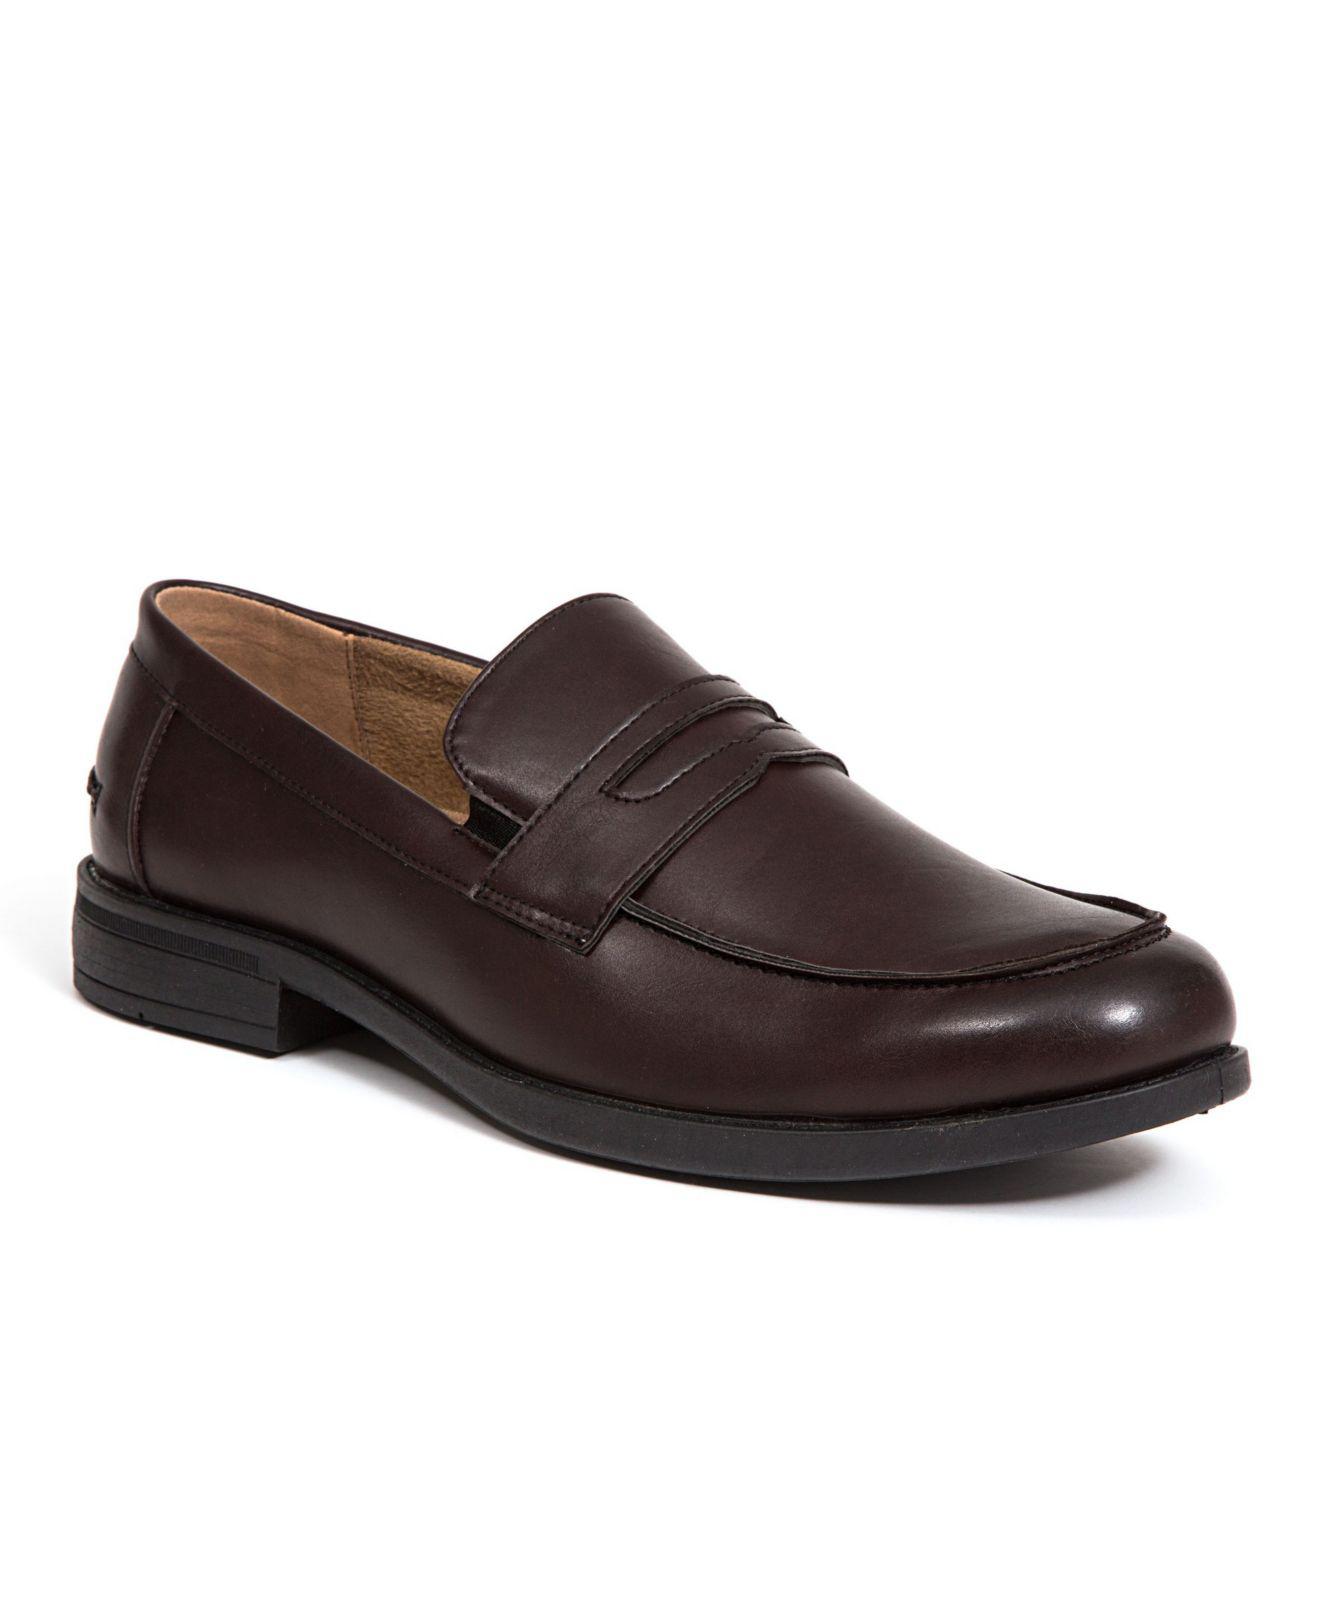 Deer Stags Leather Men's Fund Classic Dress Loafer in Dark Brown (Brown ...